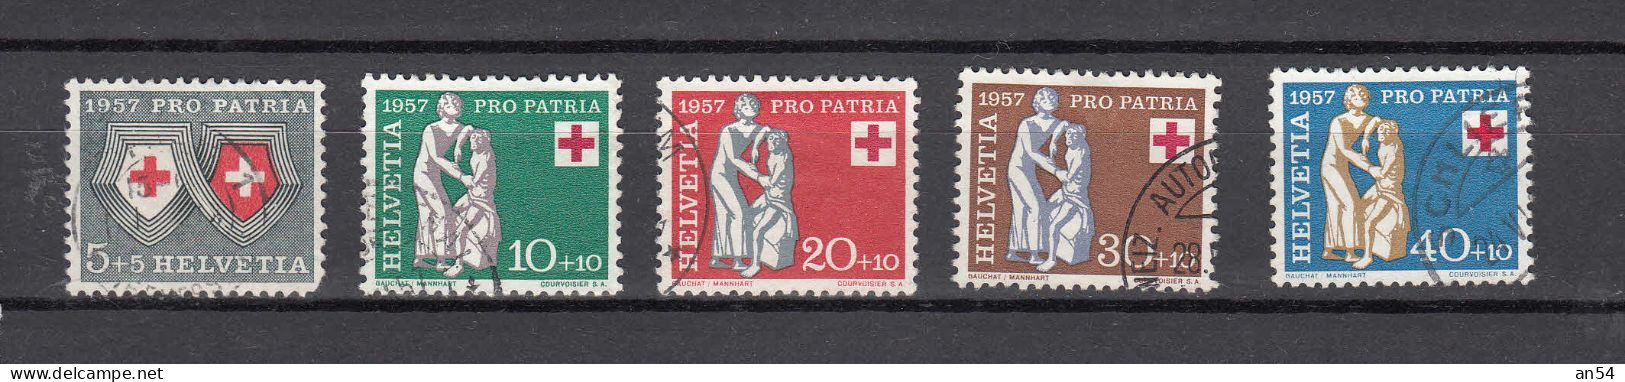 PP   1957  N° B81 à B85  OBLITERES   COTE 20.00         CATALOGUE SBK - Used Stamps